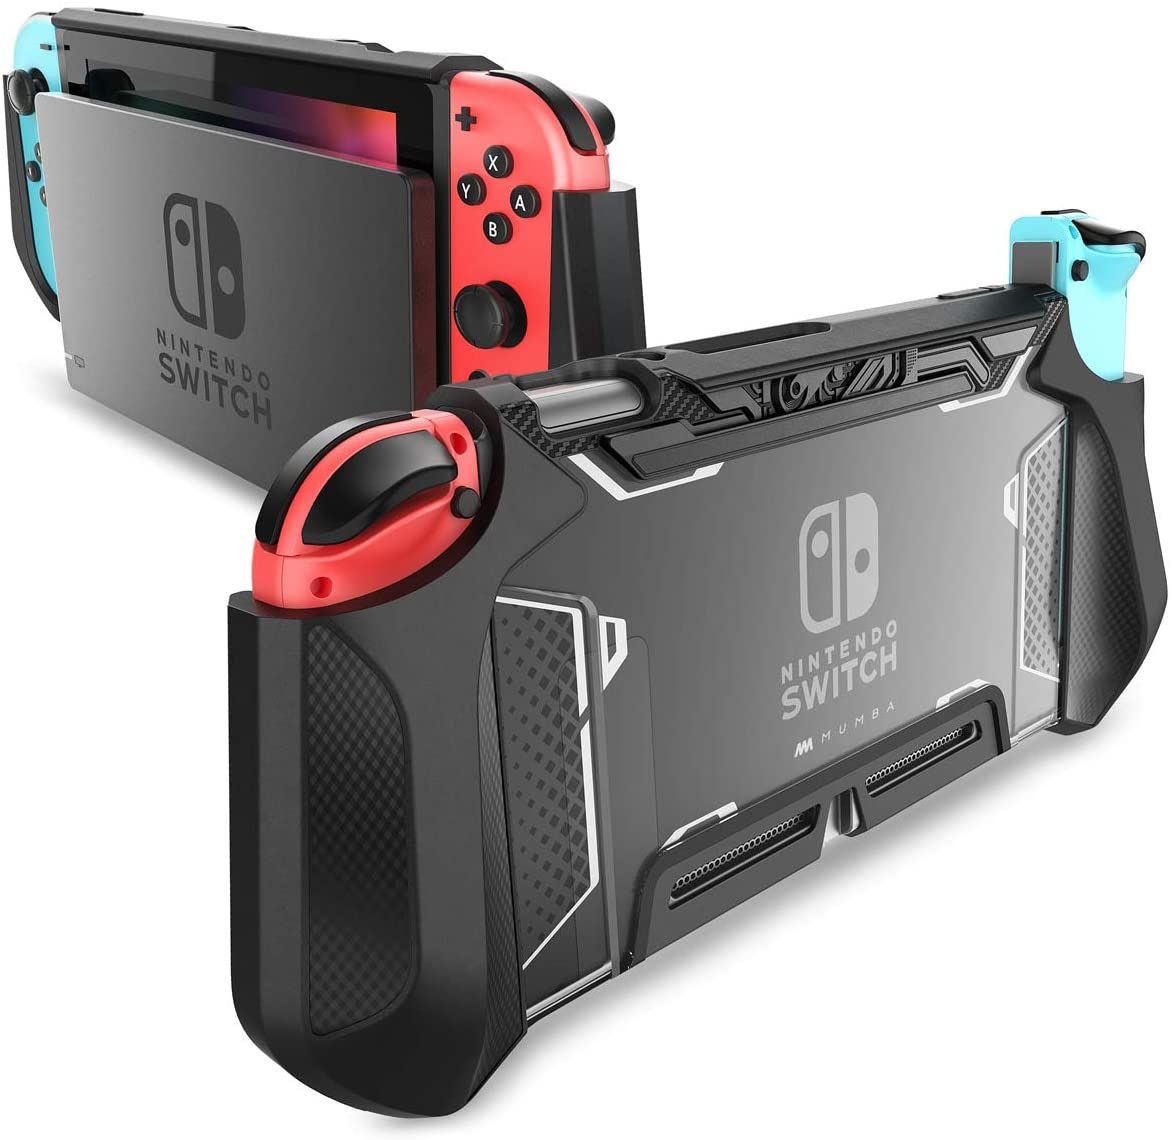 If you're looking for a case that works seamlessly with your Switch dock, the Mumba dockable case is perfect for you. Available in five different colors, this case provides bulk where you hold it but also slides into the dock. You can even remove your Joy-Cons!